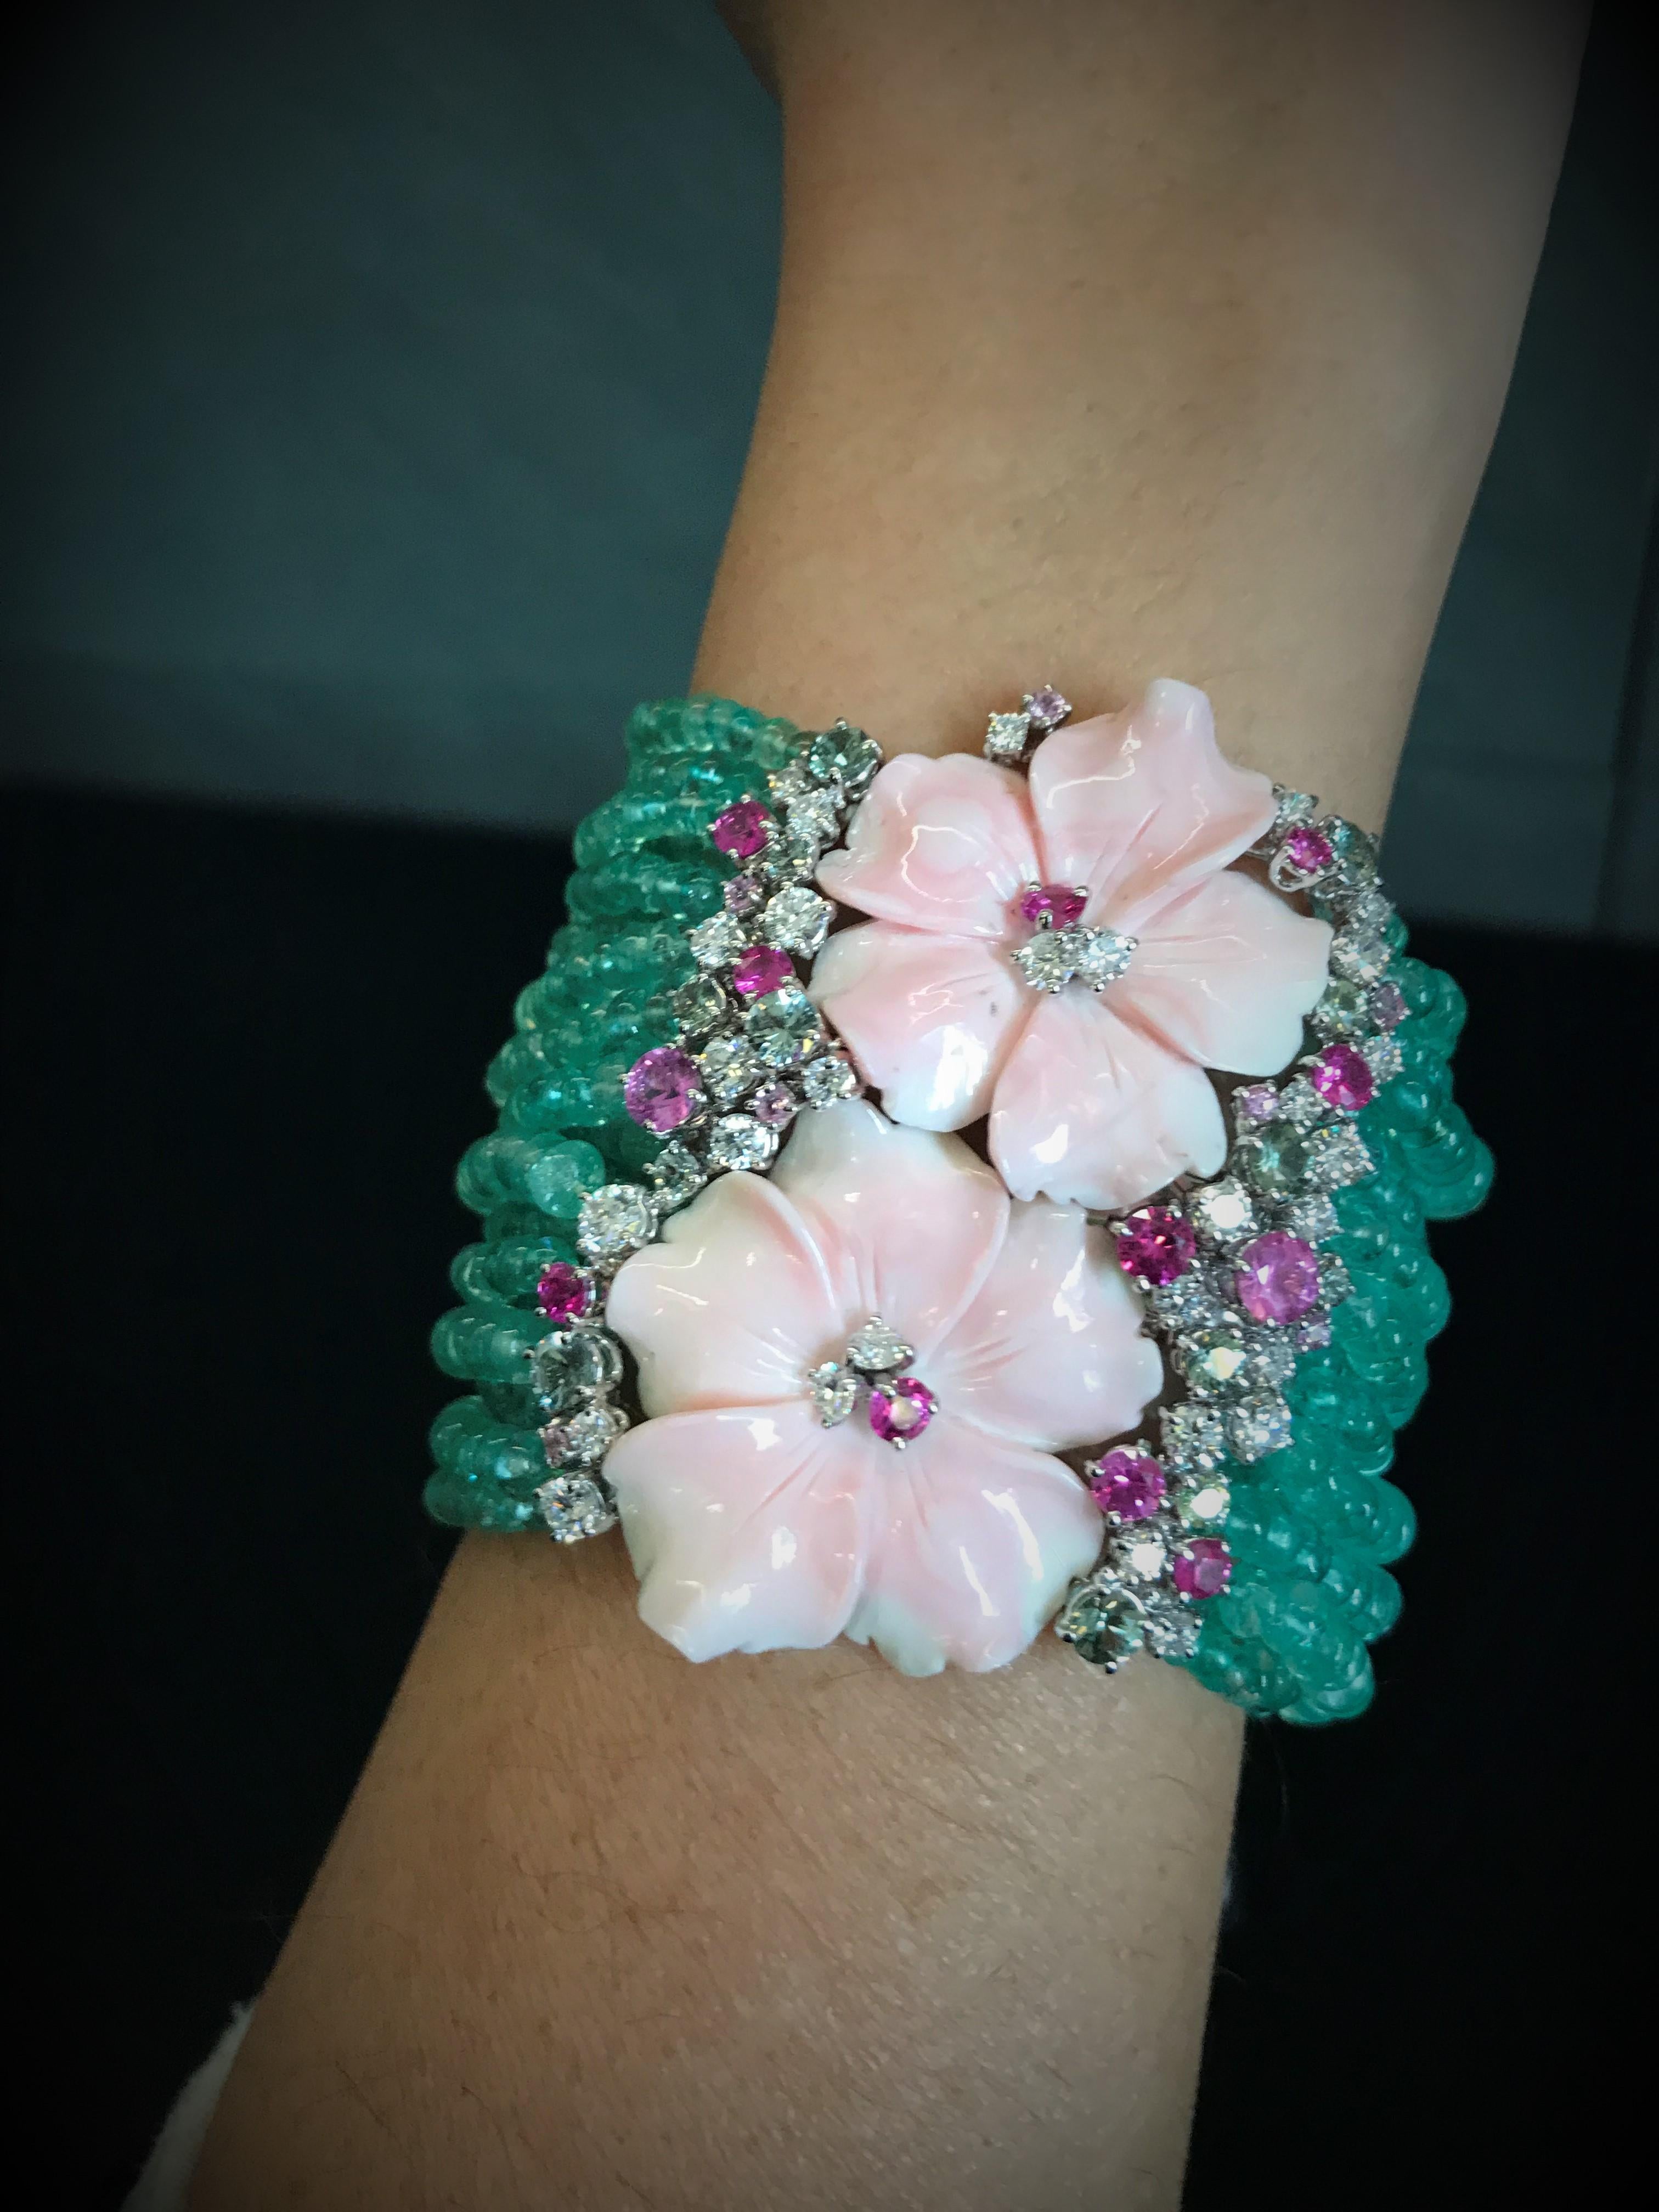 This bracelet, inspired by the fresh sweetness of flowers is made in white gold, emeralds beads threads, pink shell flowers, round brilliant cut diamonds, pink and green sapphires. 
Diamonds total ct 2.66
Emeralds total ct 394.85
Sapphires total ct